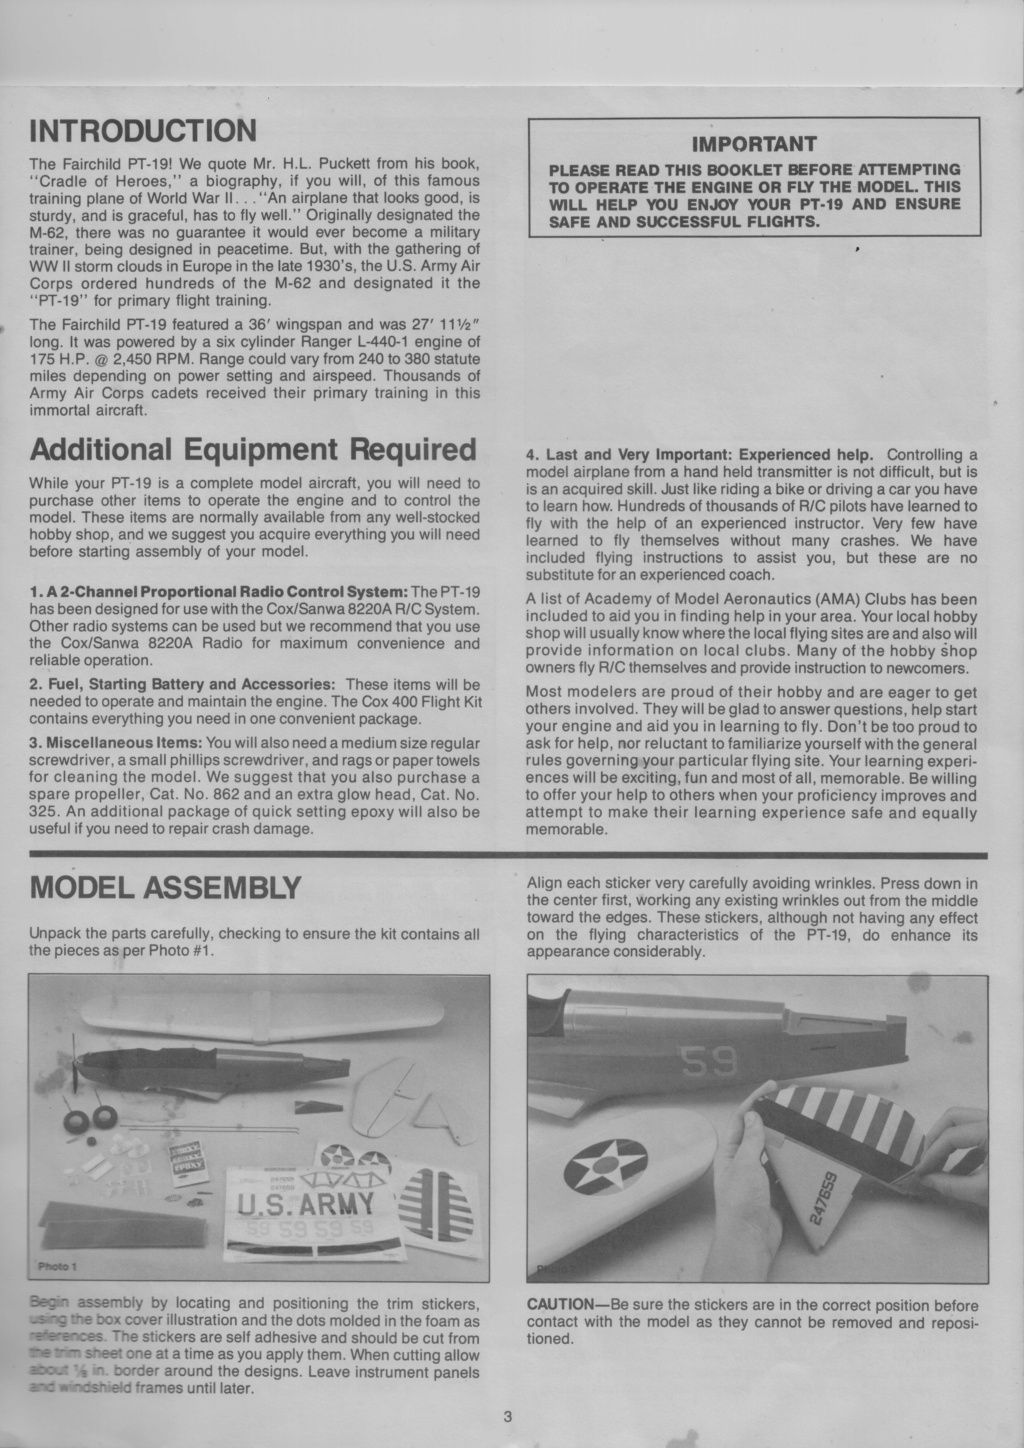 RC PT-19  pictures , decals and manual scans . Cox_rc27